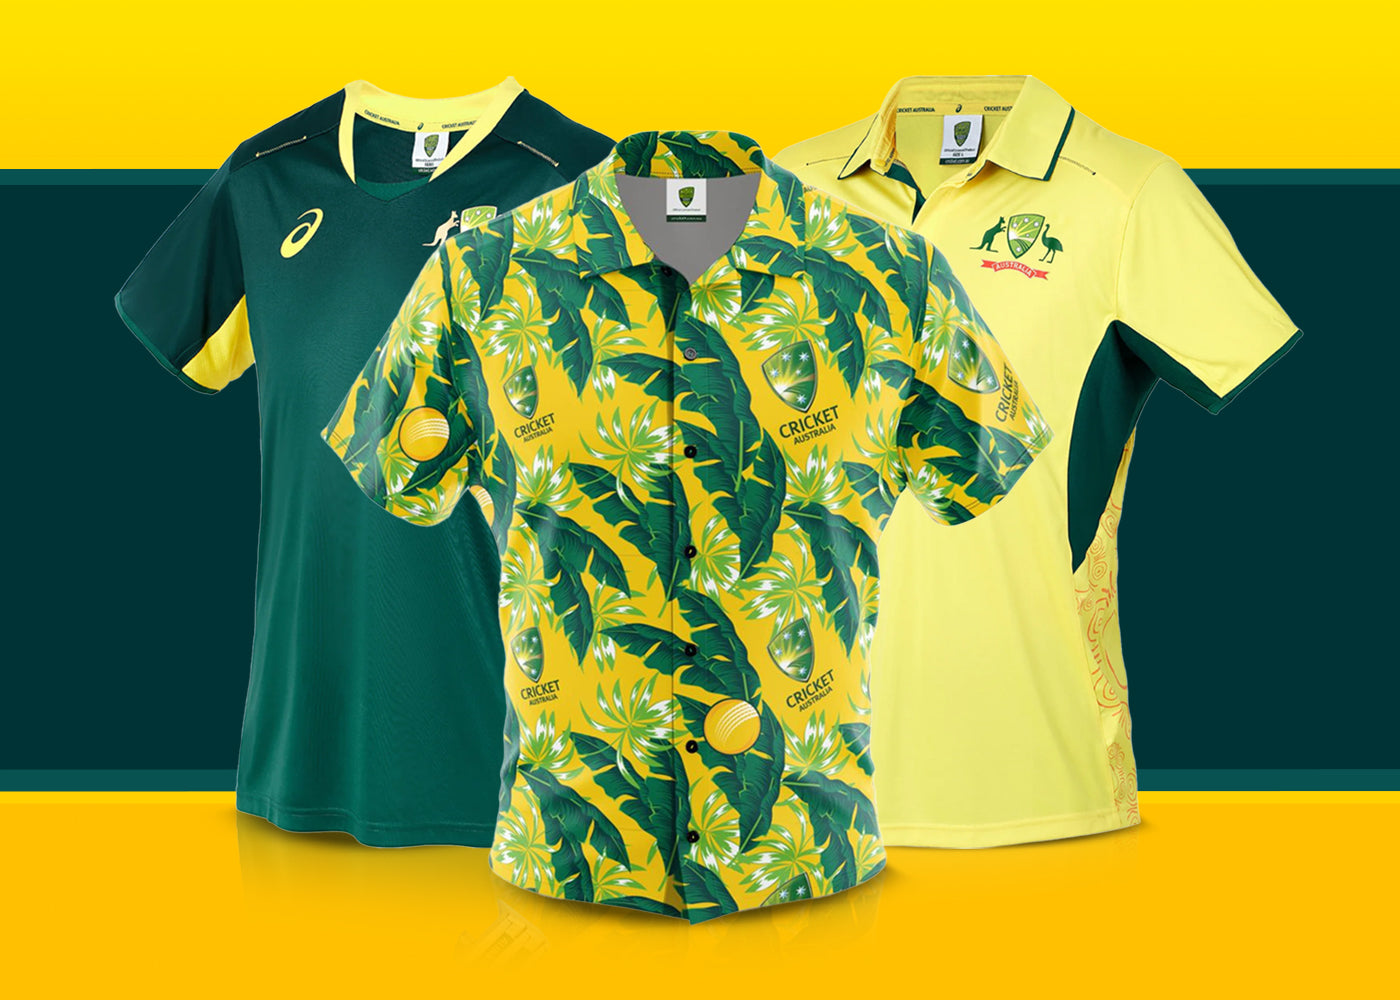 Cheer on Australia in green and gold during the ICC Men's T20 World Cup with the latest Cricket Australia Supporter Range.